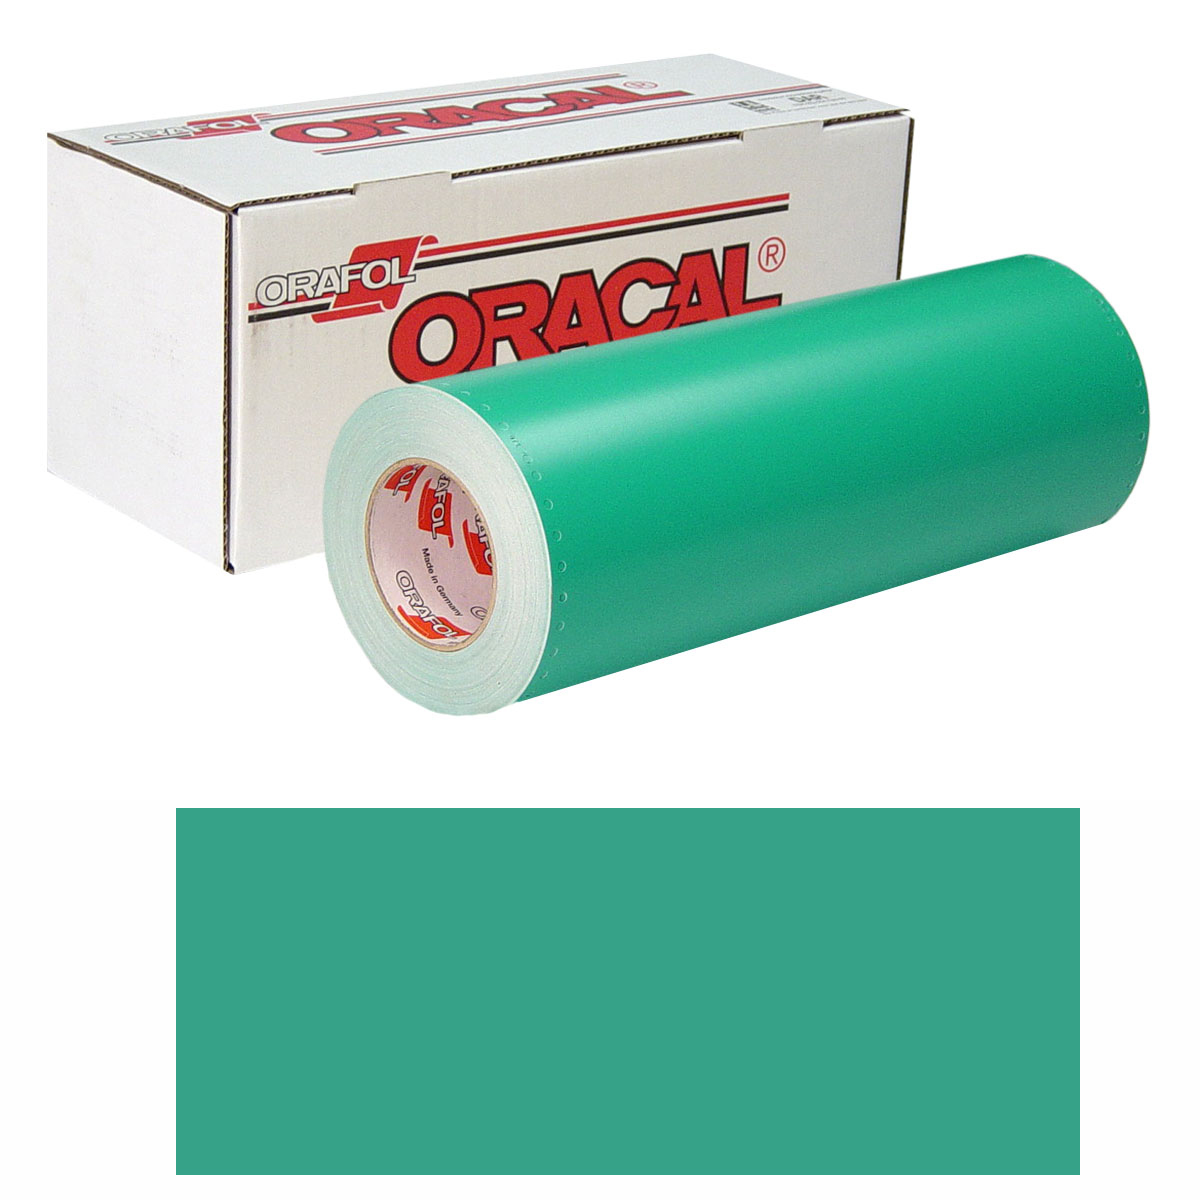 ORACAL 8500 Unp 24in X 10yd 009 Middle Green